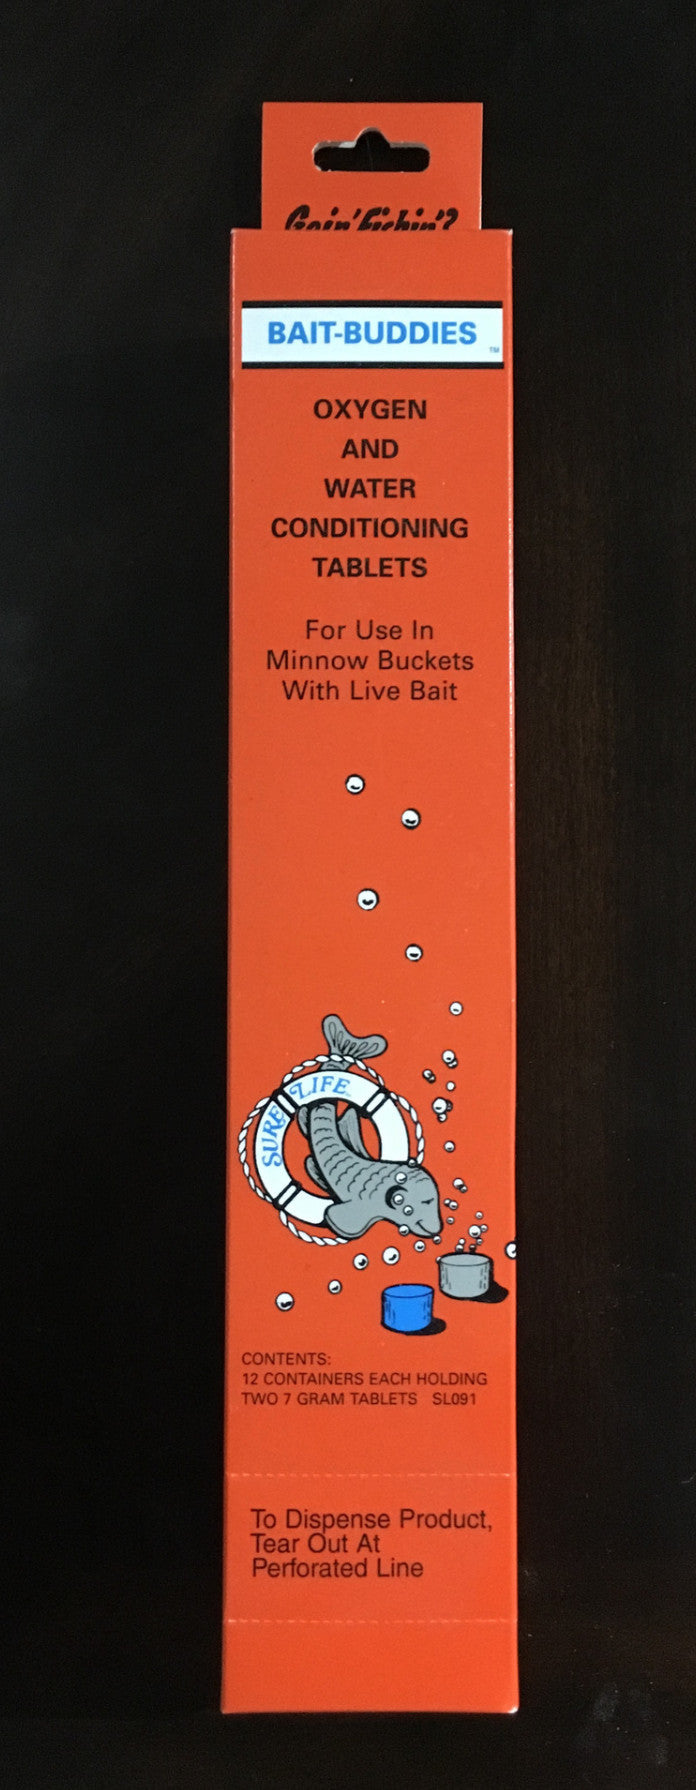 Bait Buddies Tablets - Oxygen and Conditioning Tablets by Sure Life